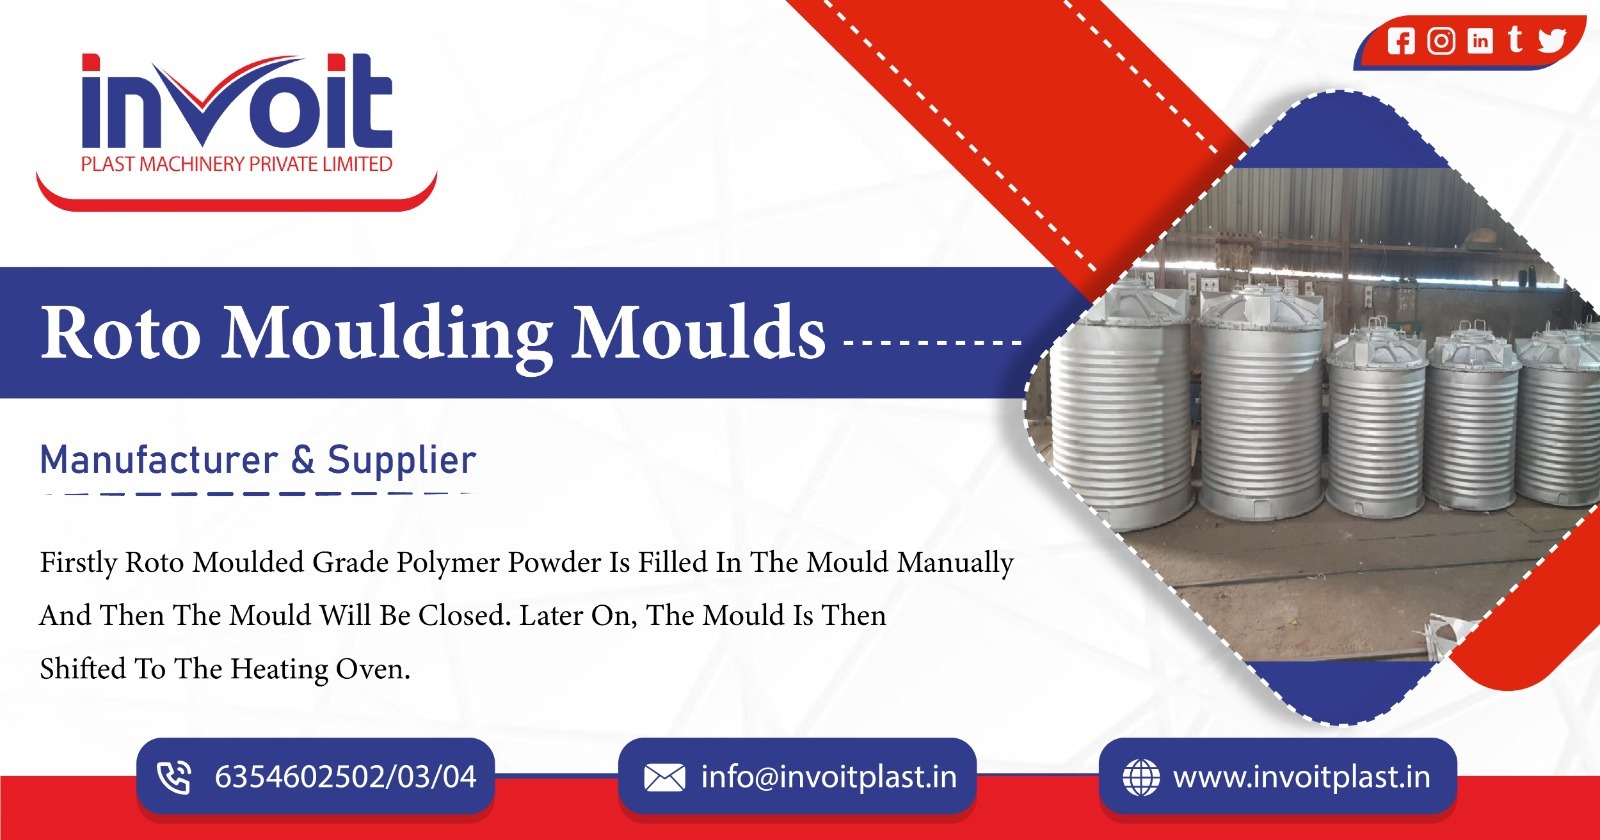 Roto Moulding Moulds Supplier in Hyderabad